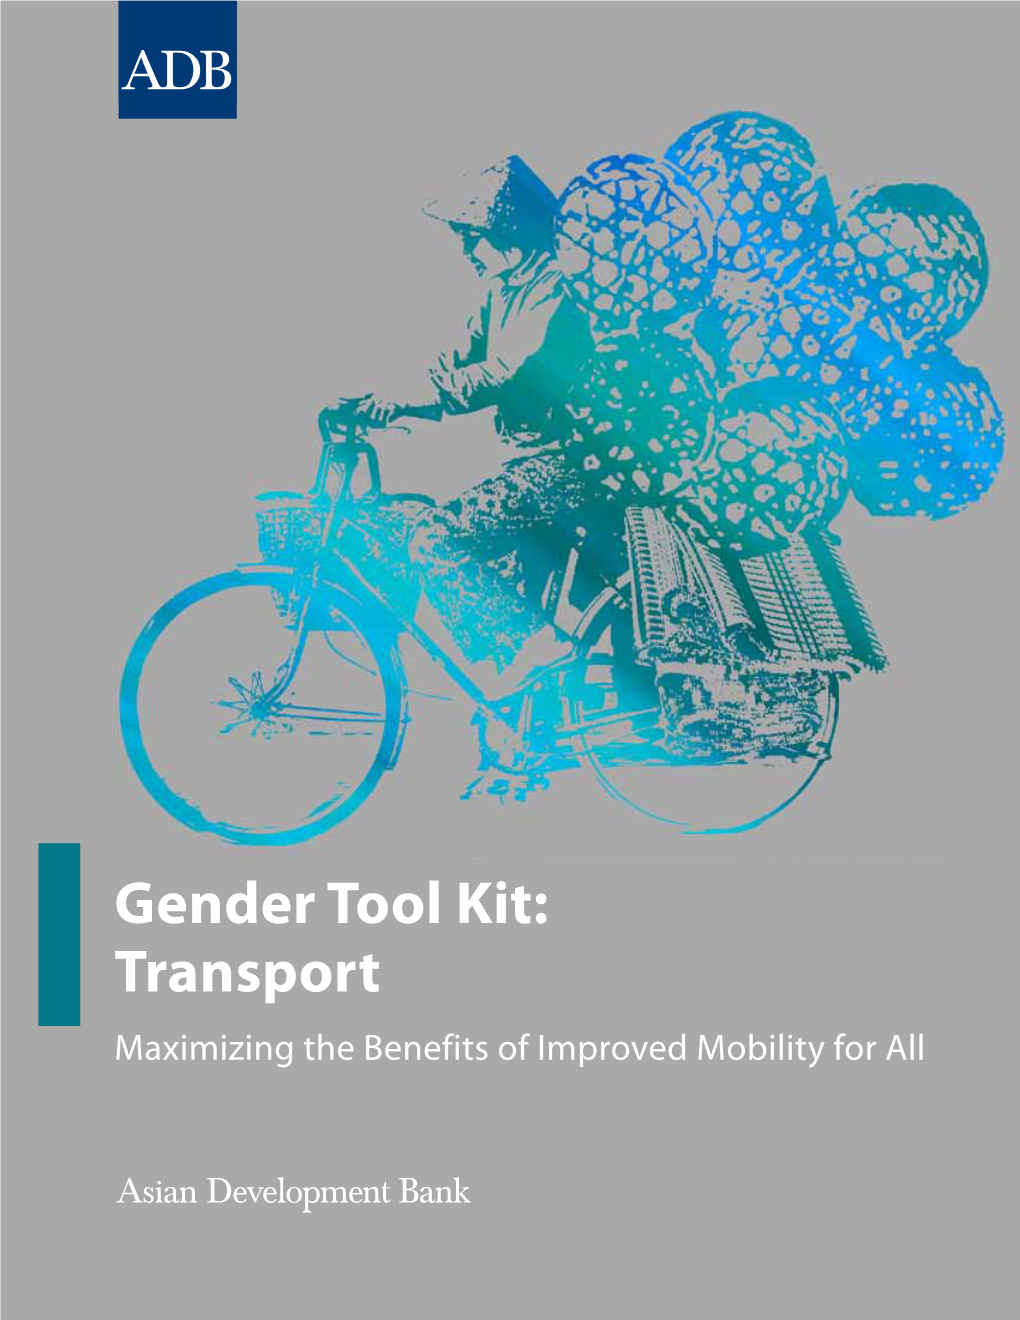 Gender Tool Kit: Transport Maximizing the Benefits of Improved Mobility for All